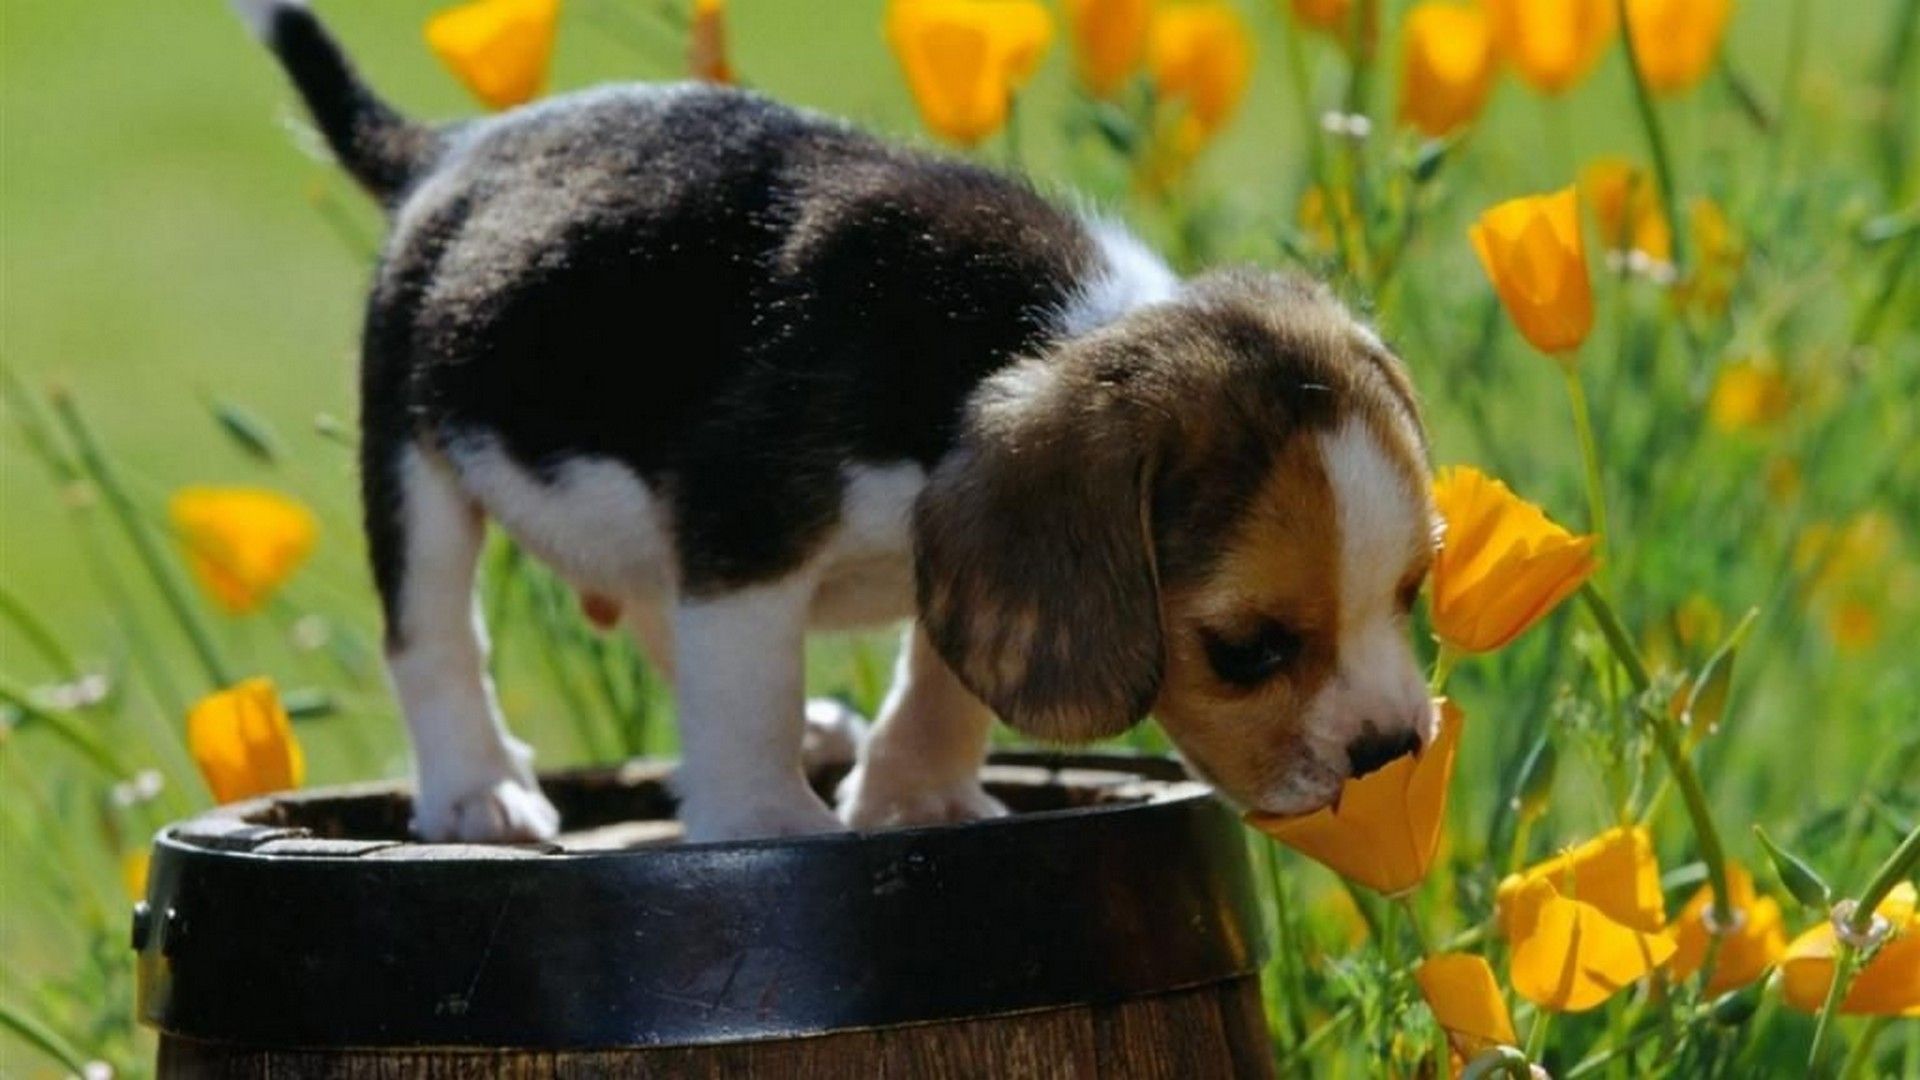 Cute Spring Desktop Background HD. Best HD Wallpaper. Baby animals picture, Dogs, Dog wallpaper